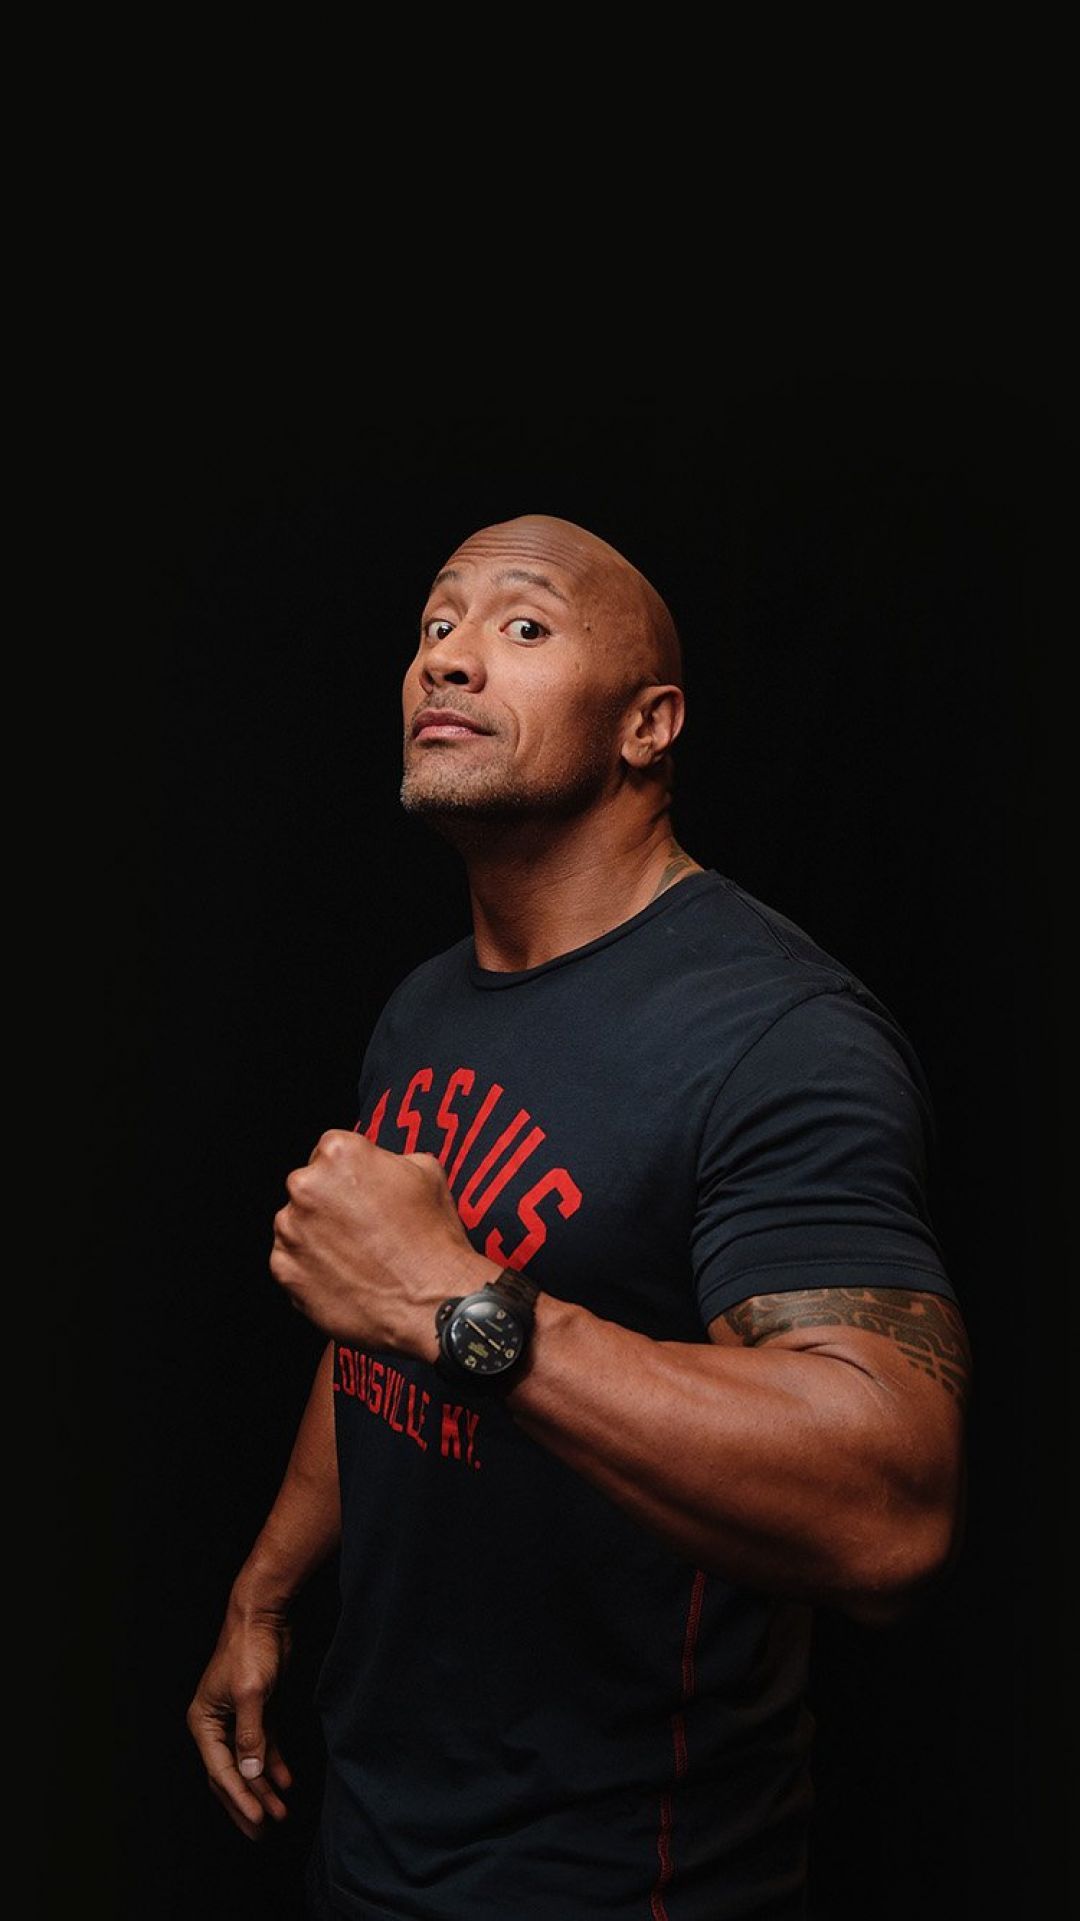 iPhone7 wallpaper. dwayne the rock dark / iPhone HD Wallpaper Background Download HD Wallpaper (Desktop Background / Android / iPhone) (1080p, 4k) (1080x1921) (2021)